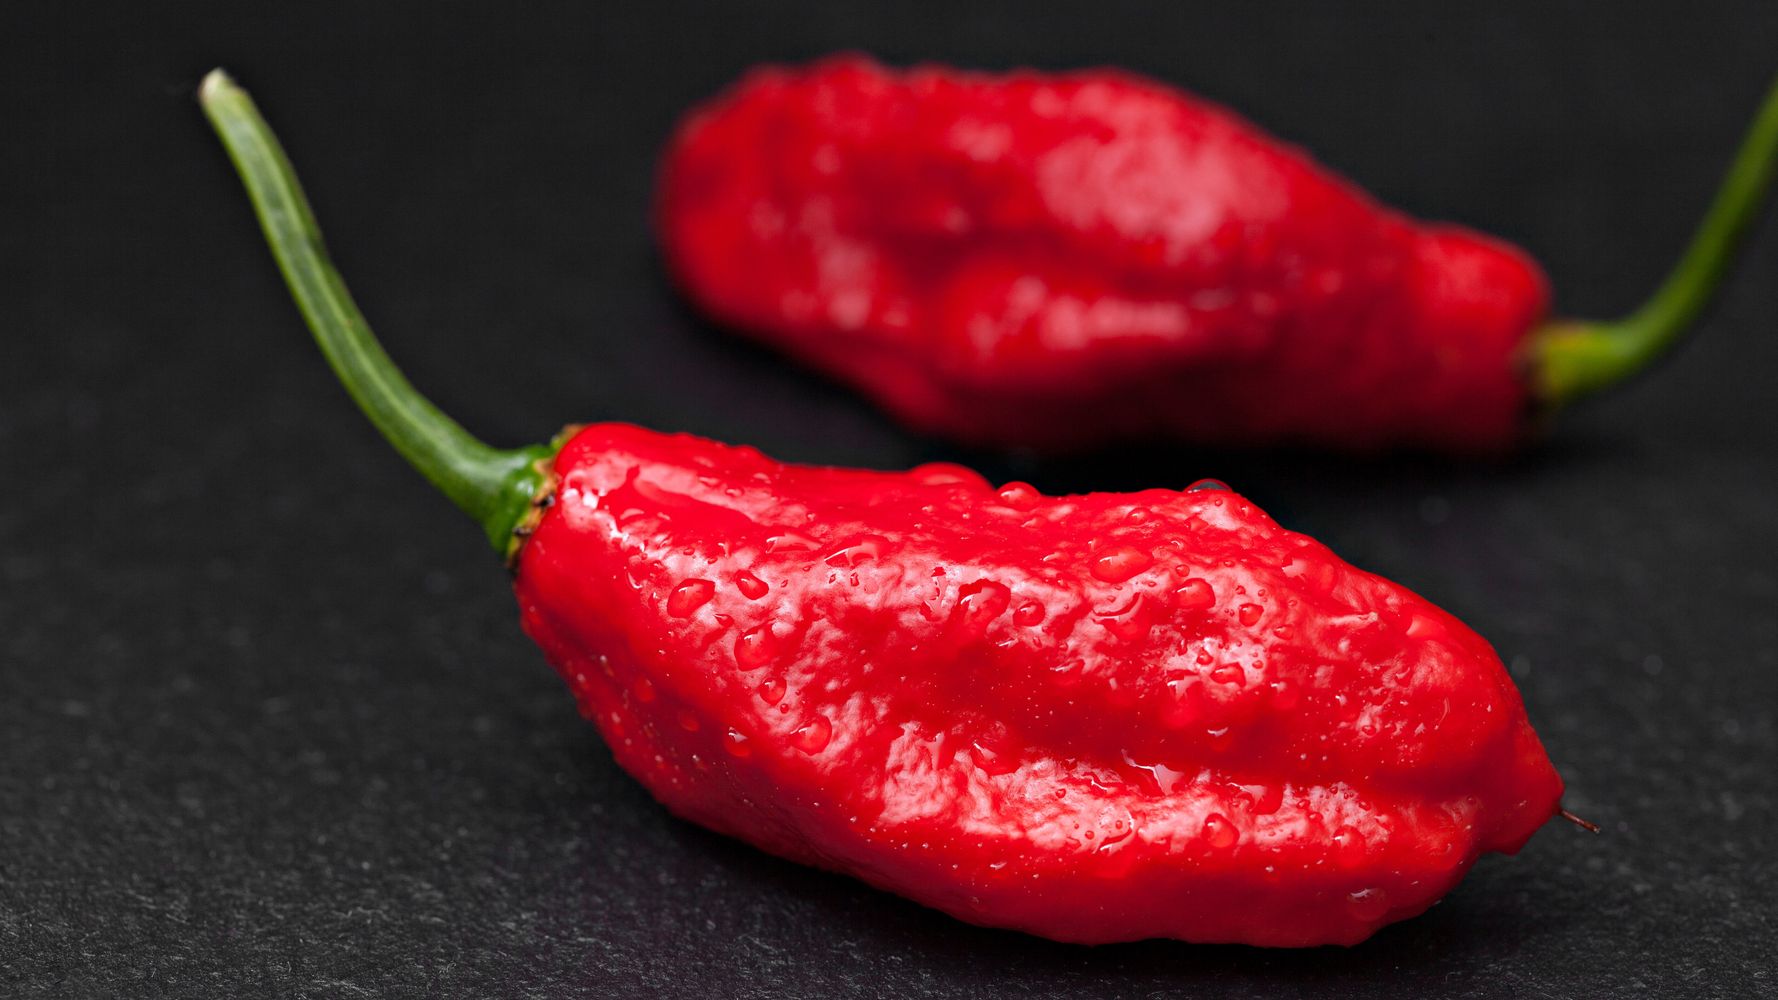 One for the "ghost pepper challenge" books. 